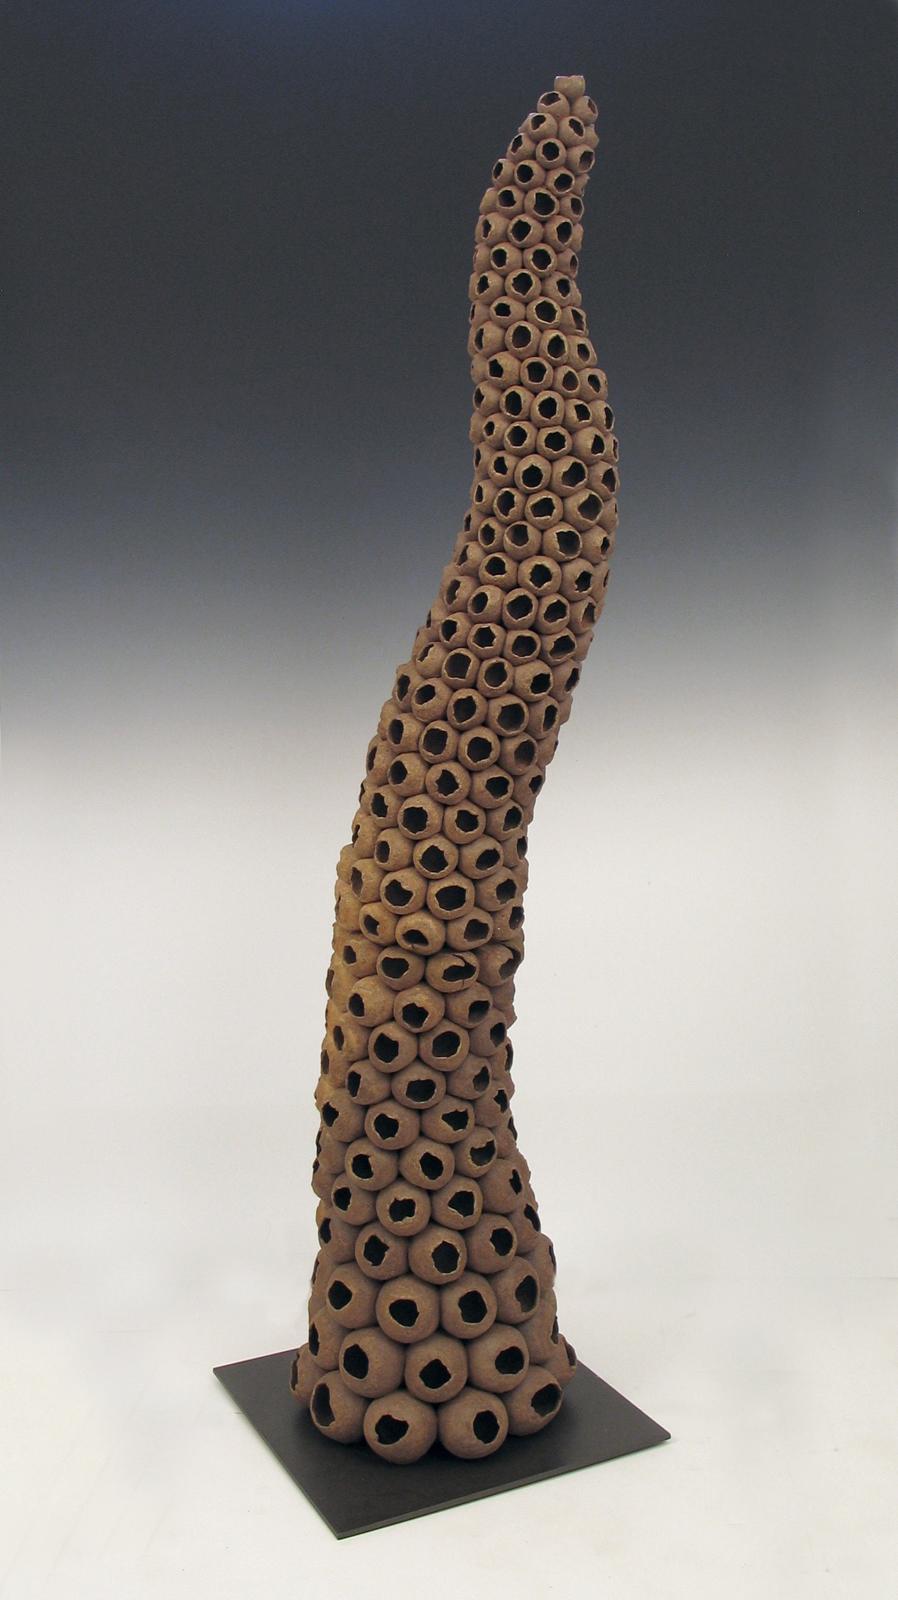 “Depleted”, natural colored ceramic seedpods bloom on an undulating form. Always looking for new materials and methods, the artist has made sculpture in such diverse materials as wood, metal, concrete, encaustic and ceramic, maintaining a view of